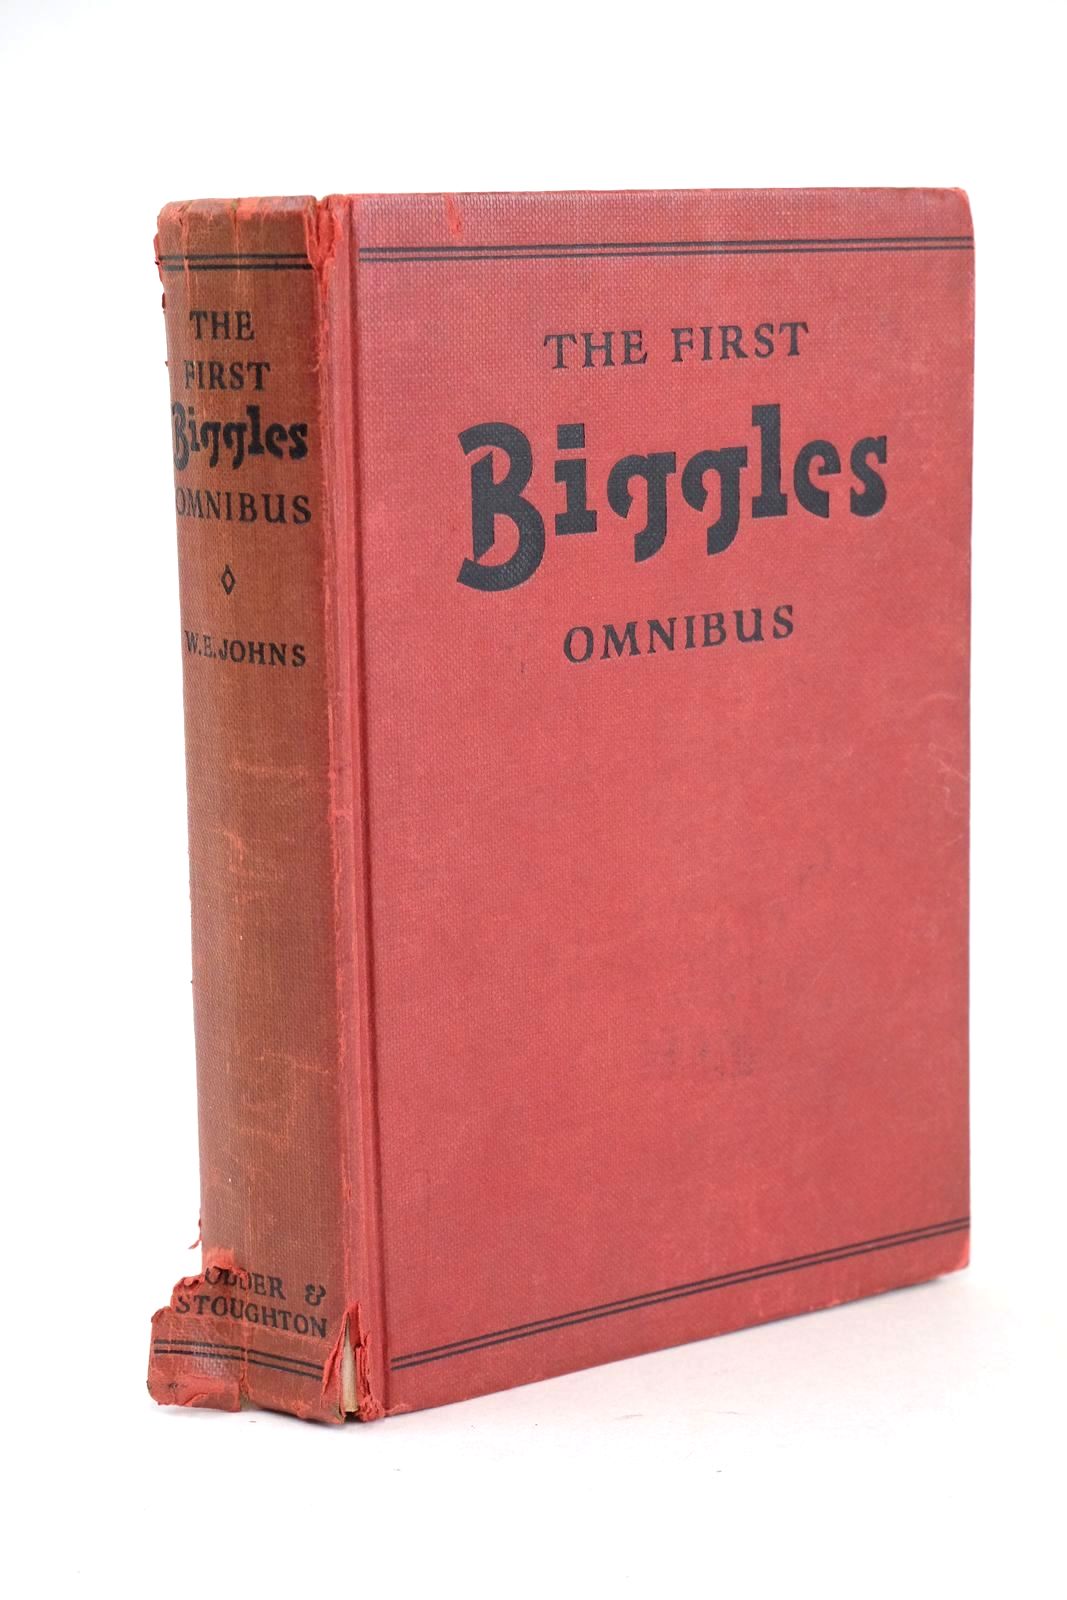 Photo of THE FIRST BIGGLES OMNIBUS written by Johns, W.E. illustrated by Stead,  published by Hodder & Stoughton (STOCK CODE: 1326142)  for sale by Stella & Rose's Books